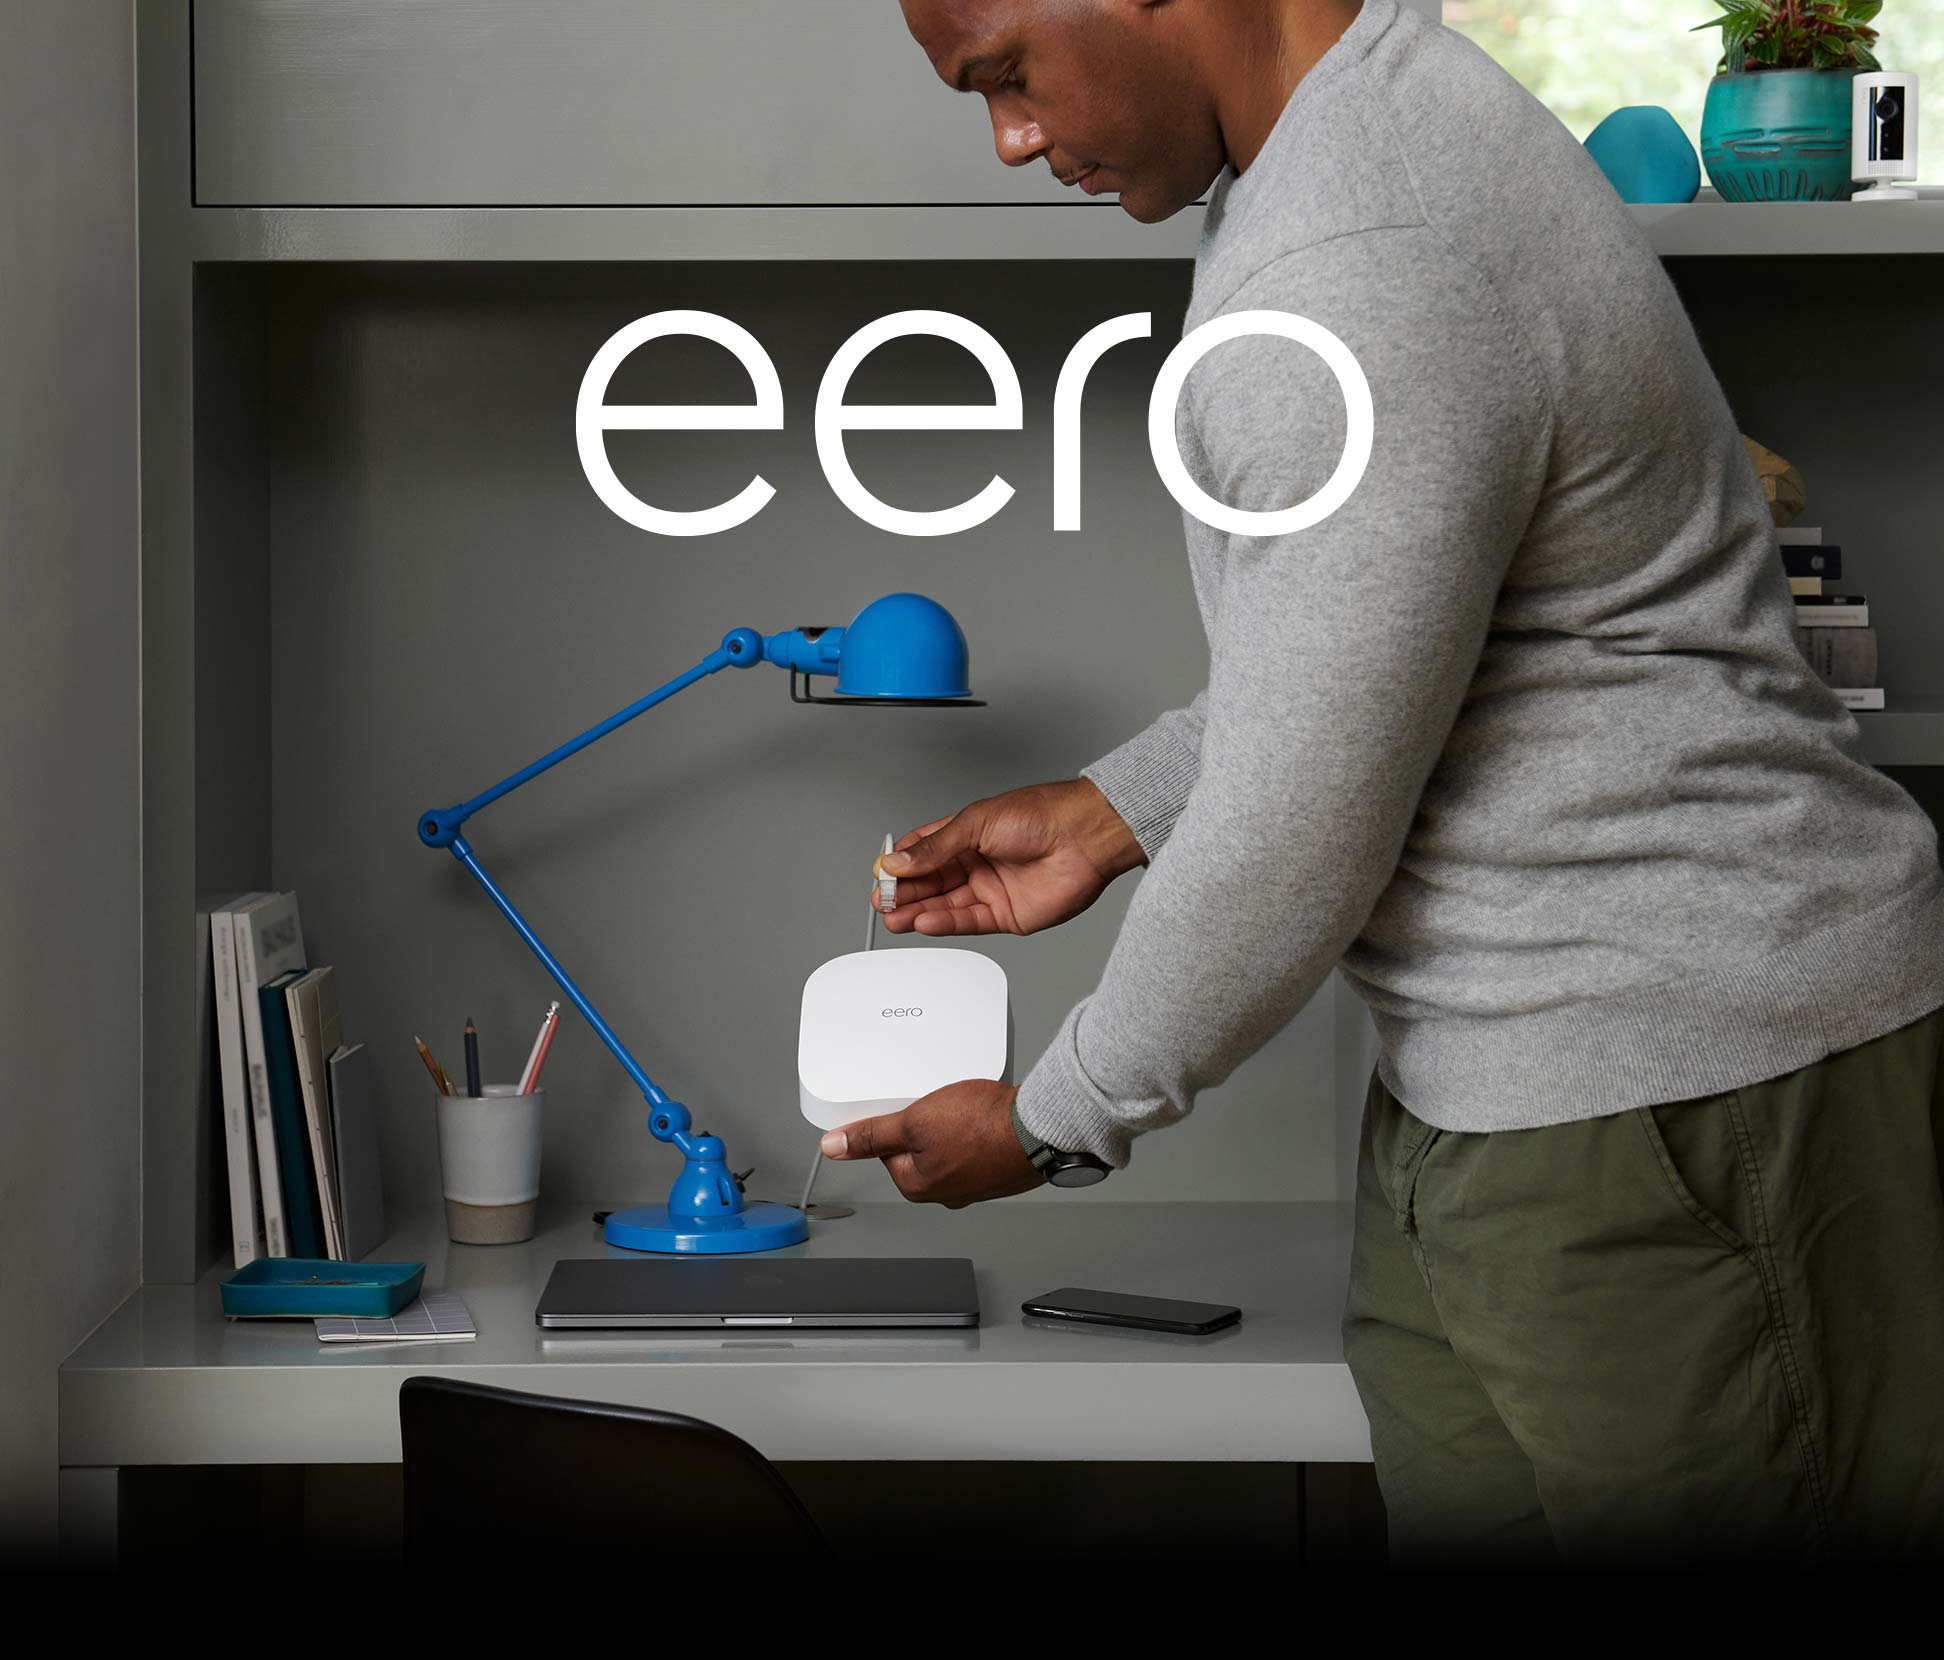 An image of a guy plugging in an electronic with the words "eero"